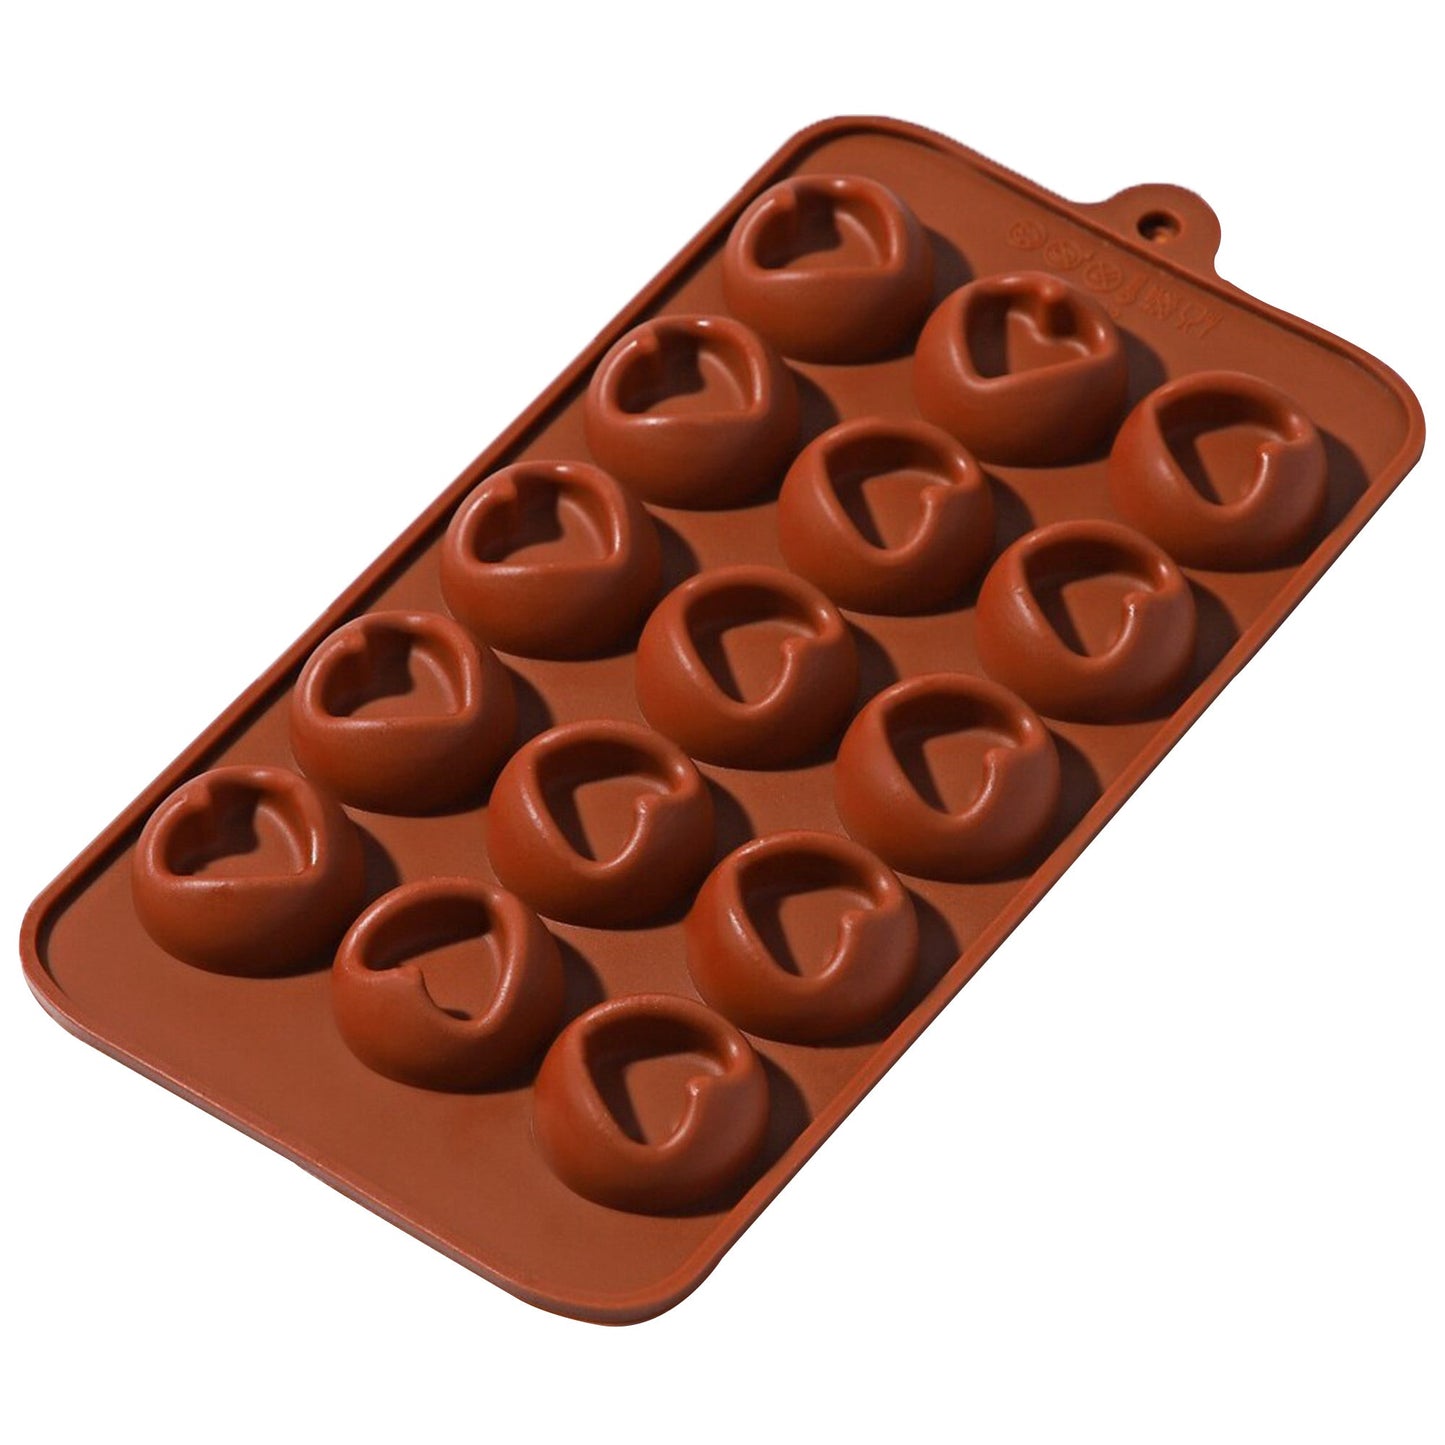 Hearts in Circles Design Silicone Chocolate Mold 15 Cavity